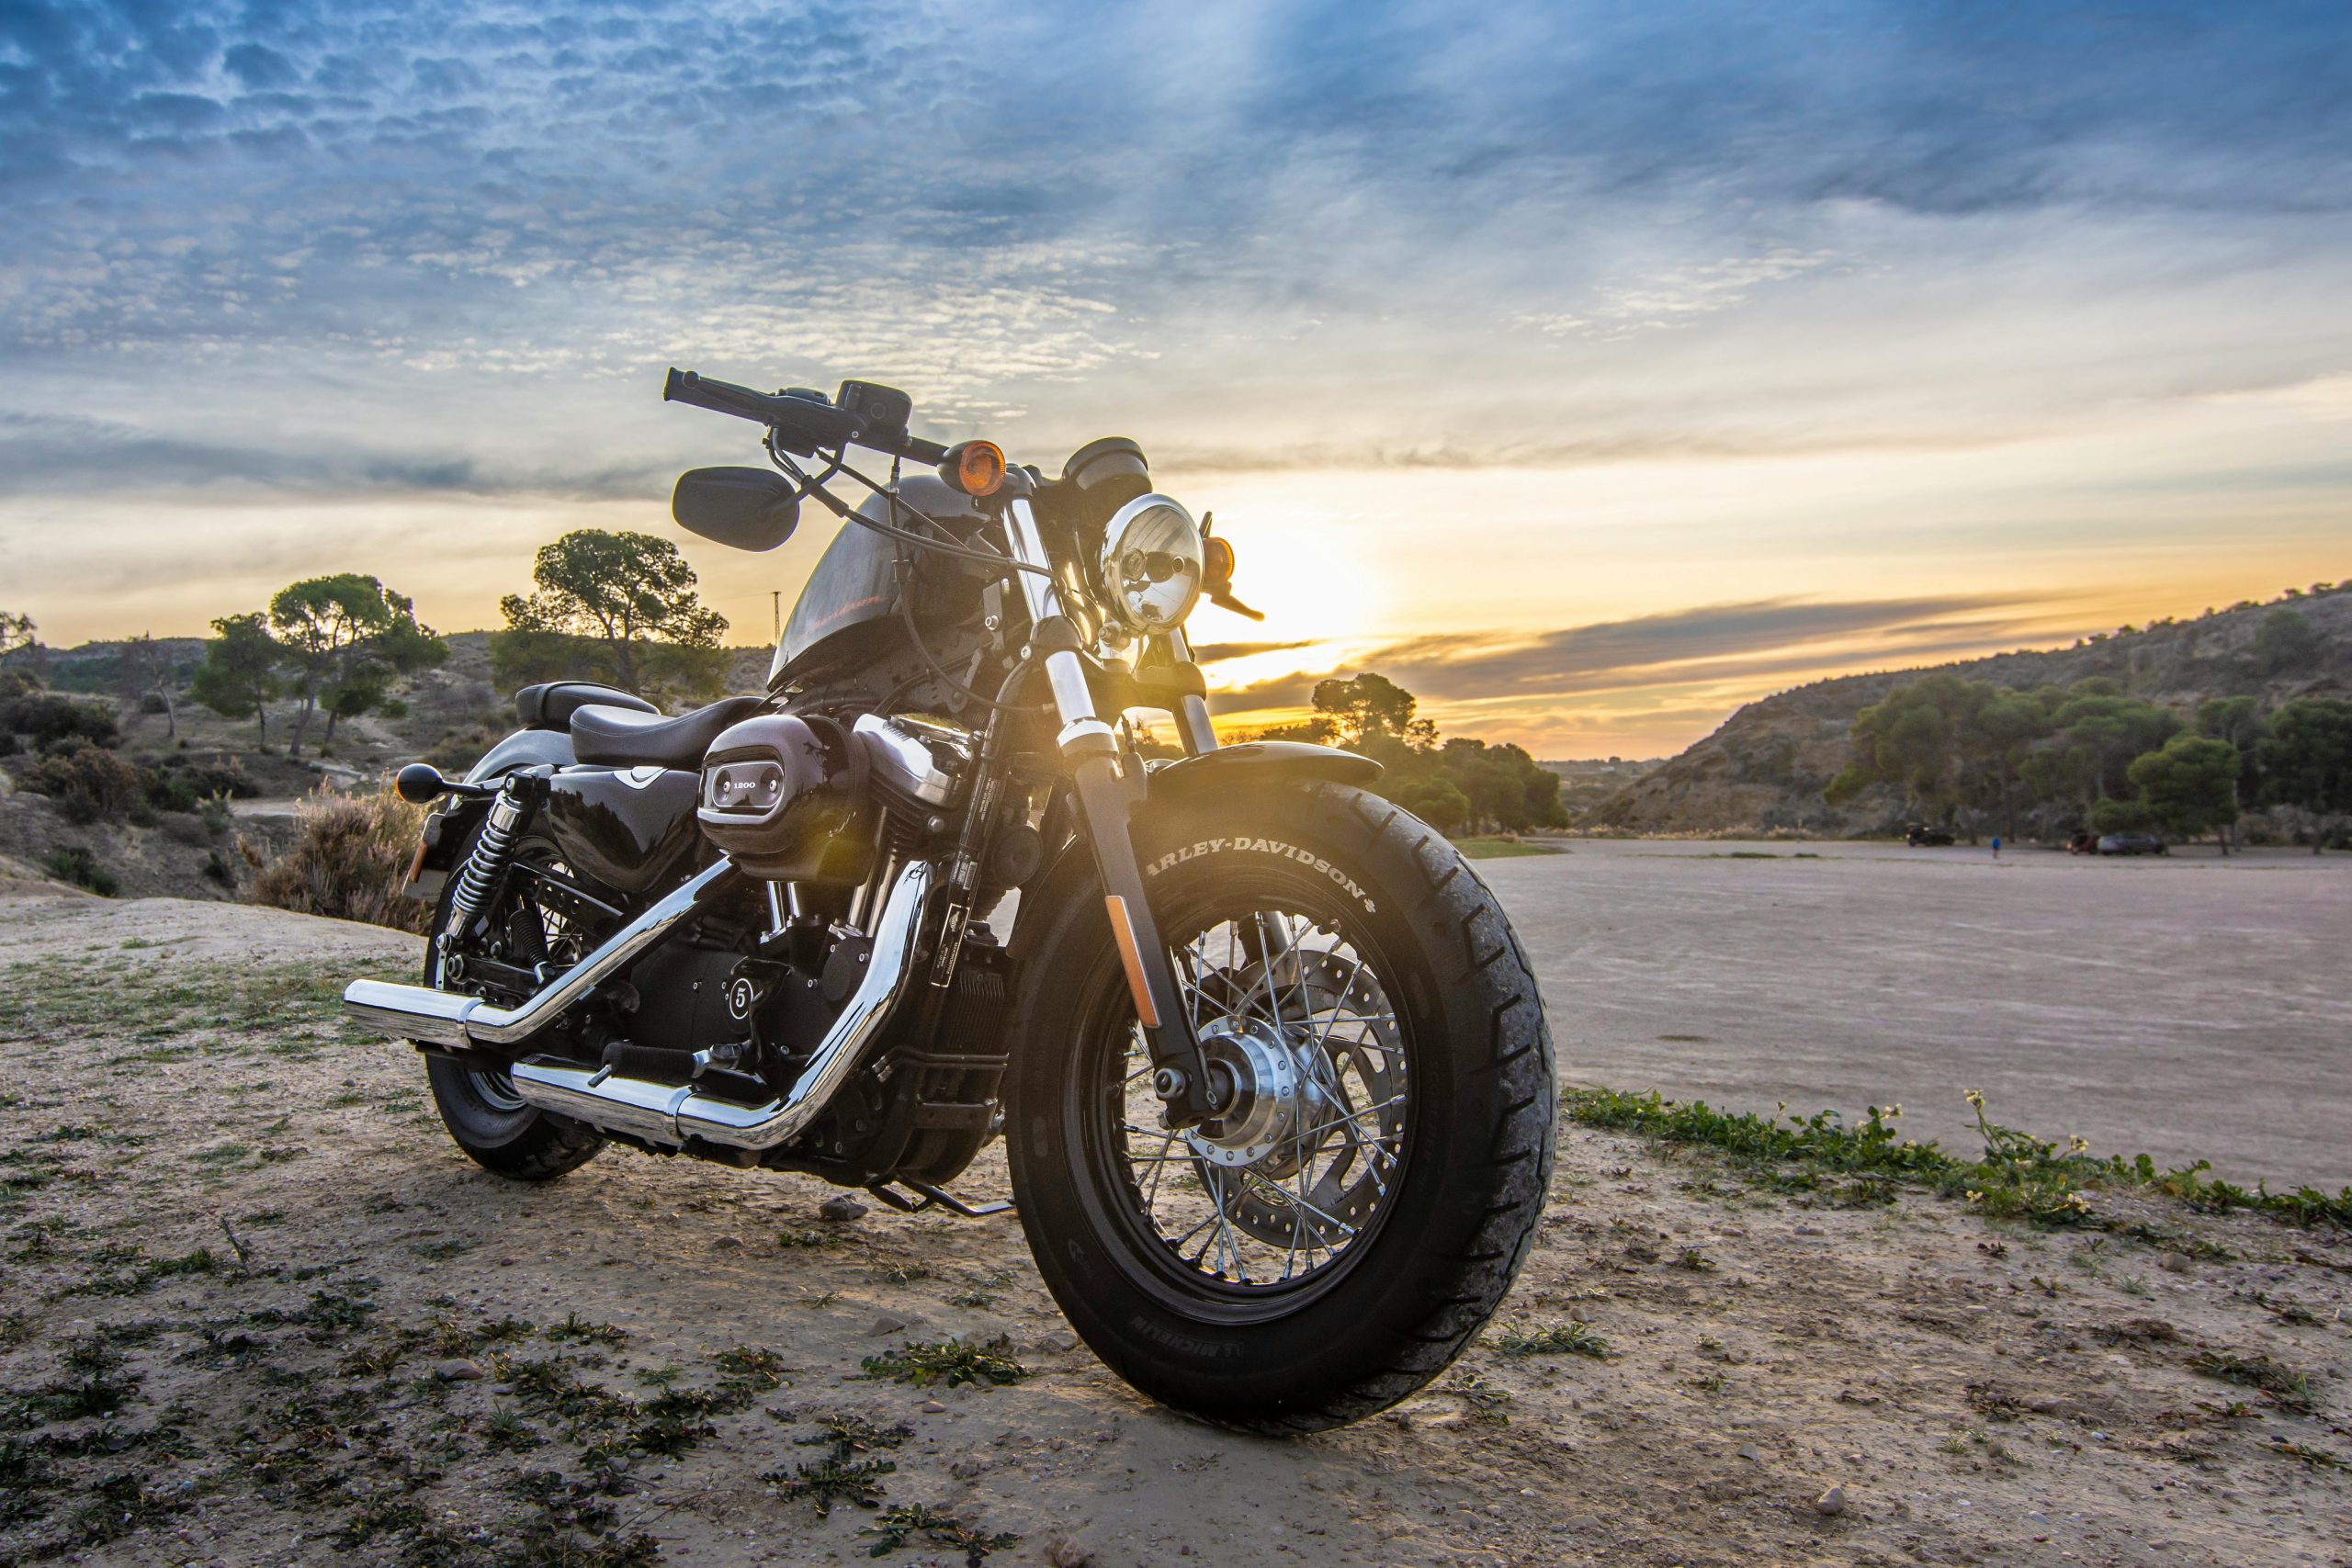 A motorcycle parked with a sunrise in the background.